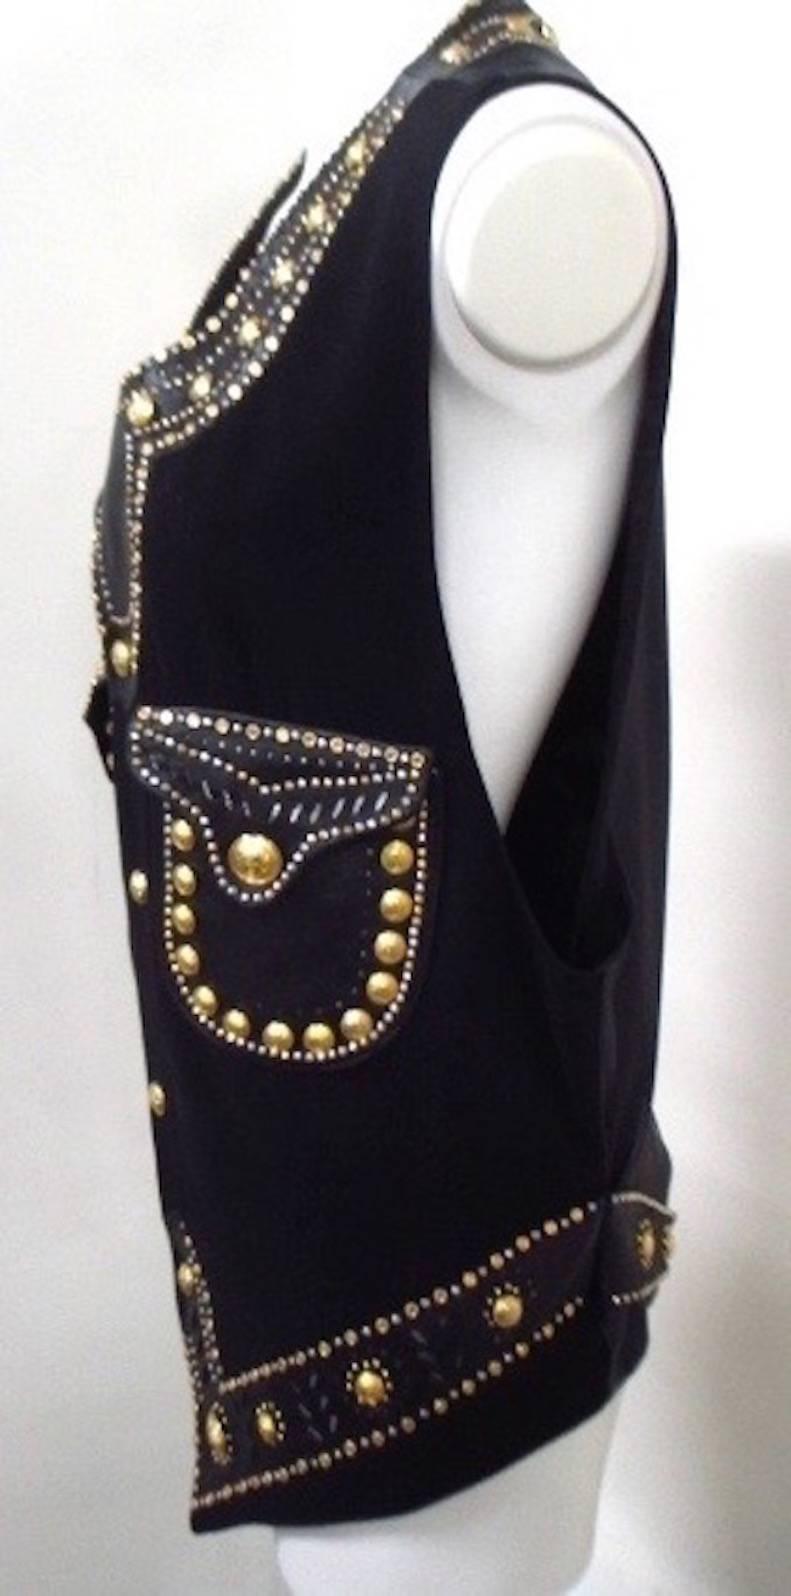 Iconic museum quality Gianni Versace men's bondage Medusa studded leather and wool vest from the Spring 1993 Miami collection.

Marked an Italian size 50.

Manufacturer - Alias S.p.a.

Please contact out stylists for additional information.